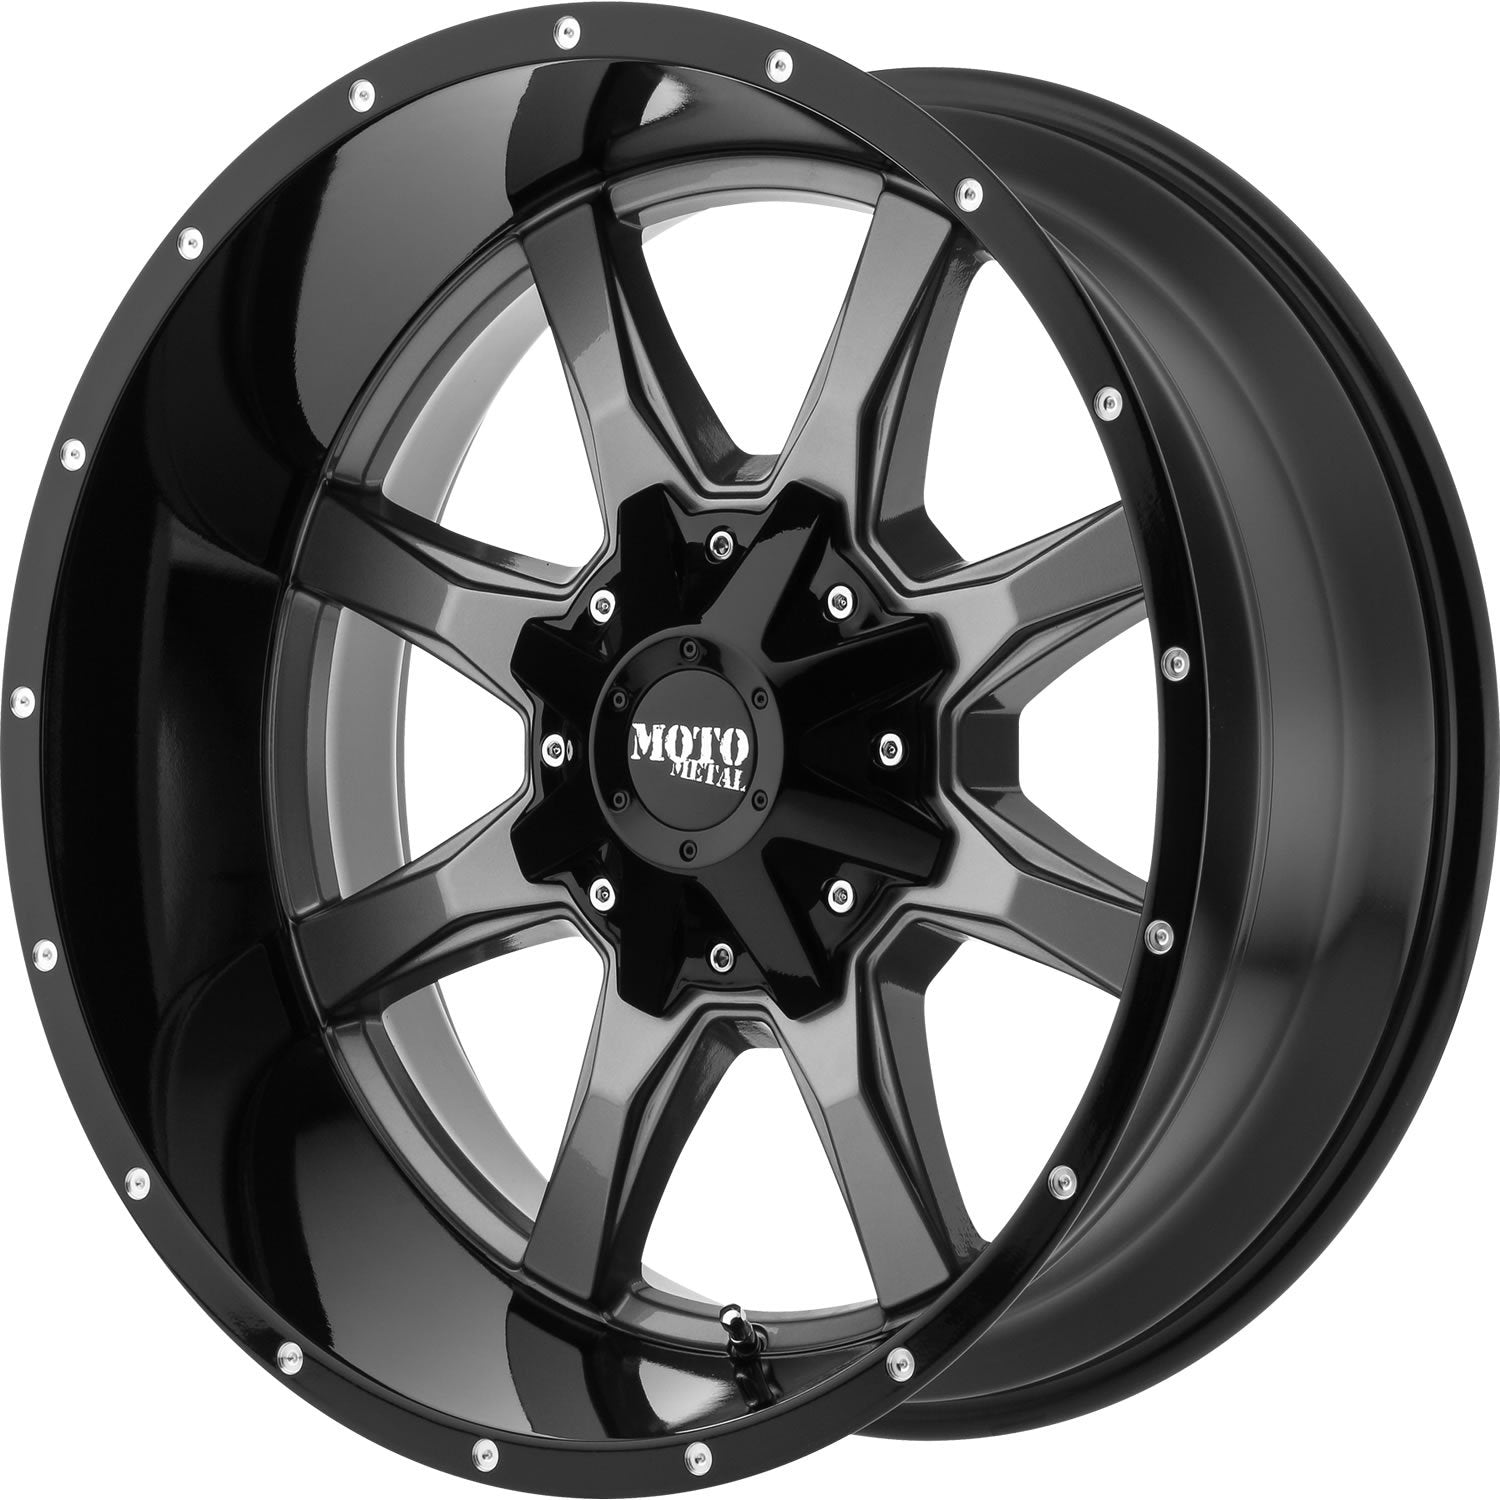 Moto Metal MO970 20x9 18 5x127 (5x5)/5x139.7 (5x5.5) Gray and Black - Tires and Engine Performance